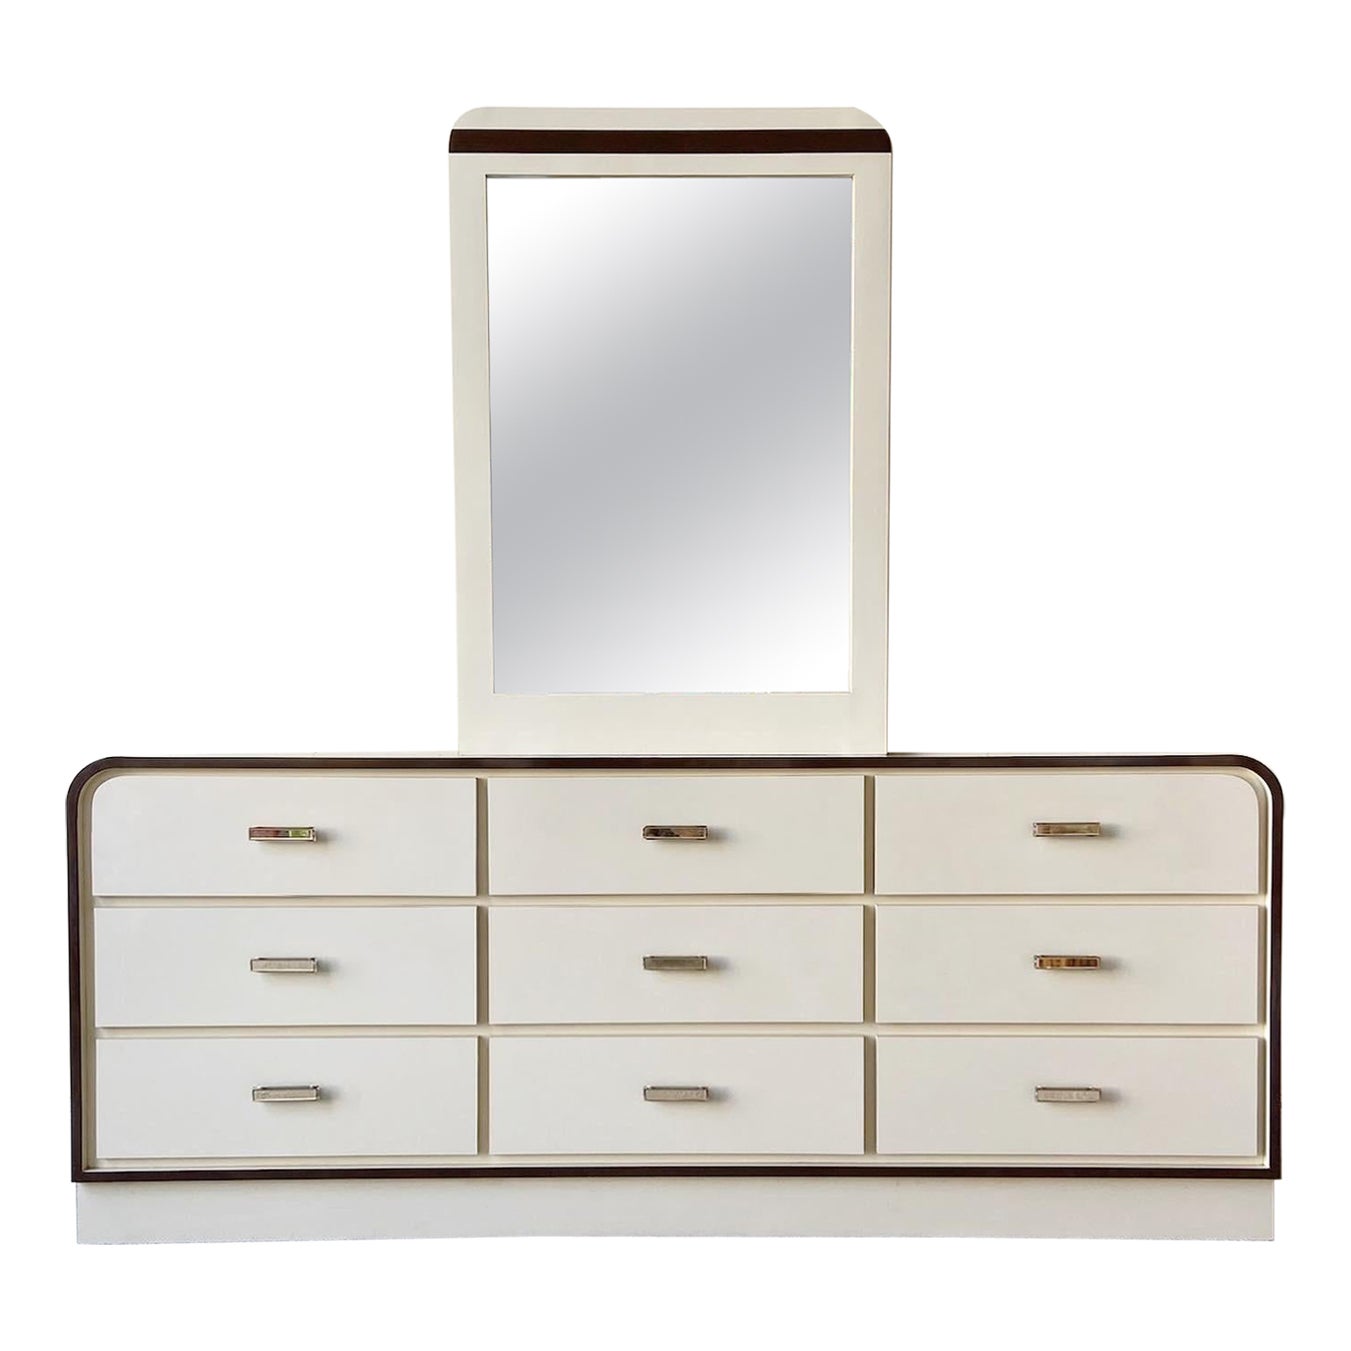 Postmodern Cream and Brown Lacquer Laminate Waterfall Dresser